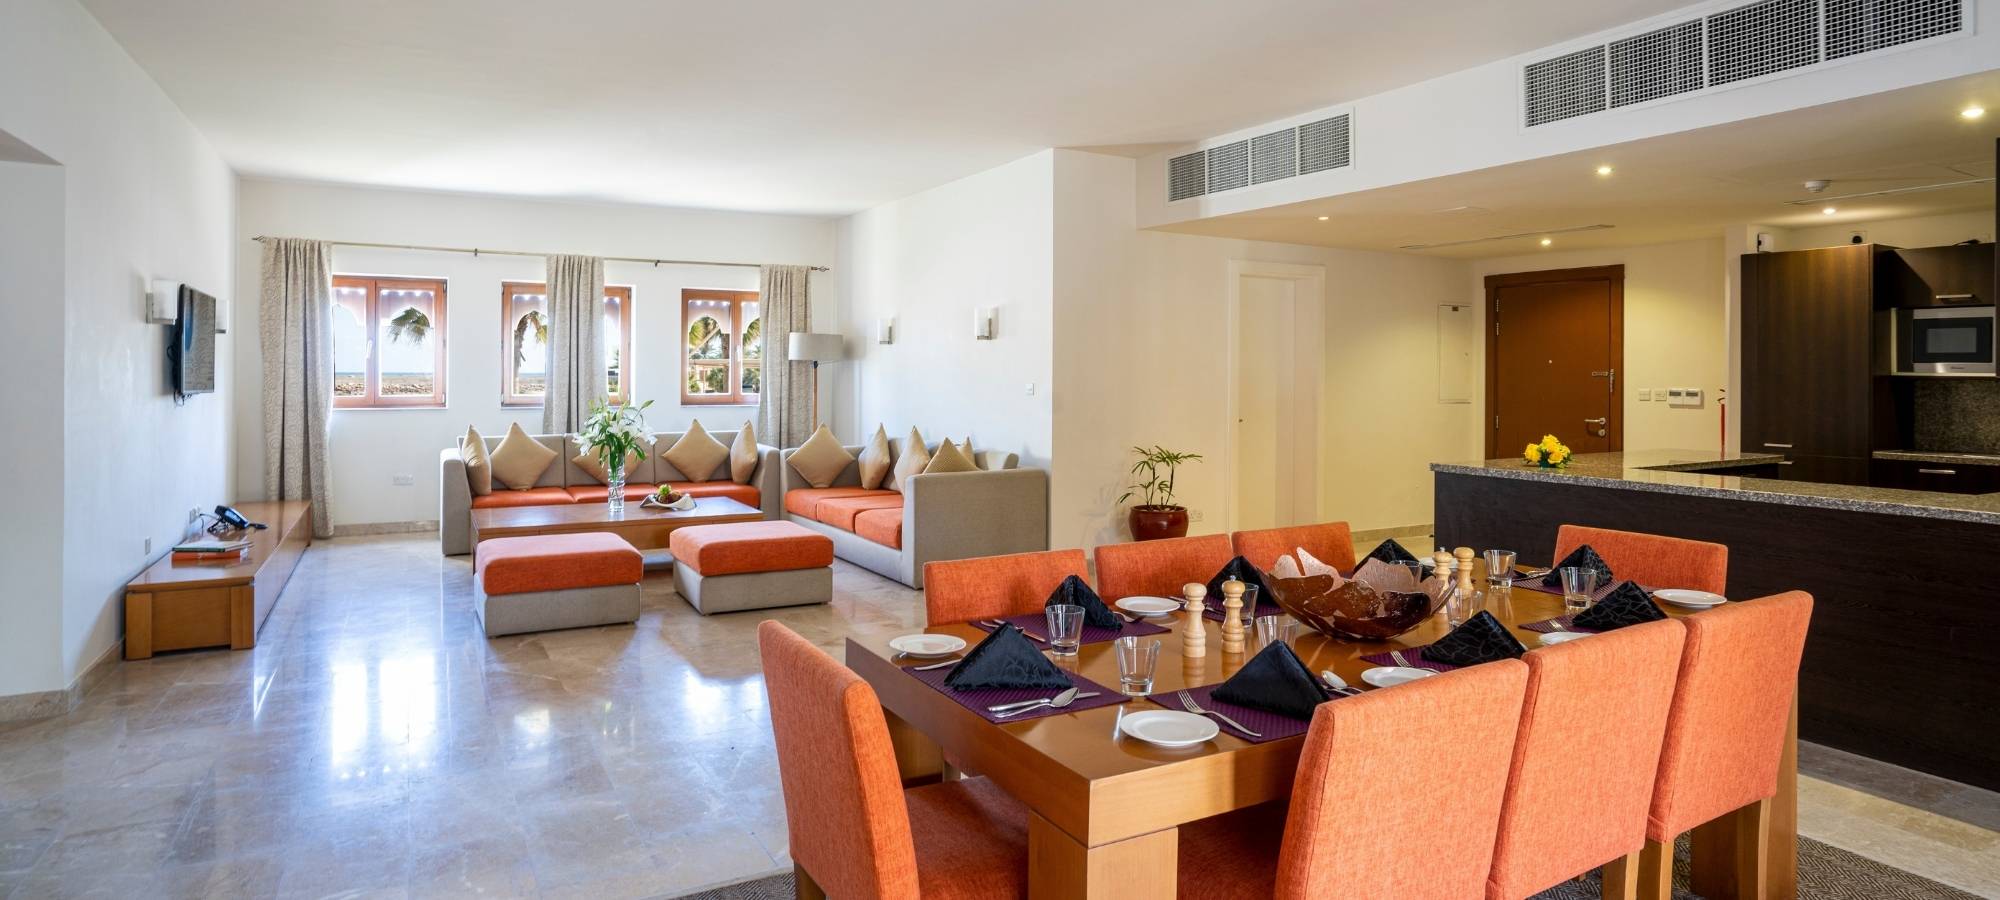 Jebel Sifah Oman hotel 3 Bedrooms Apartment Living Room